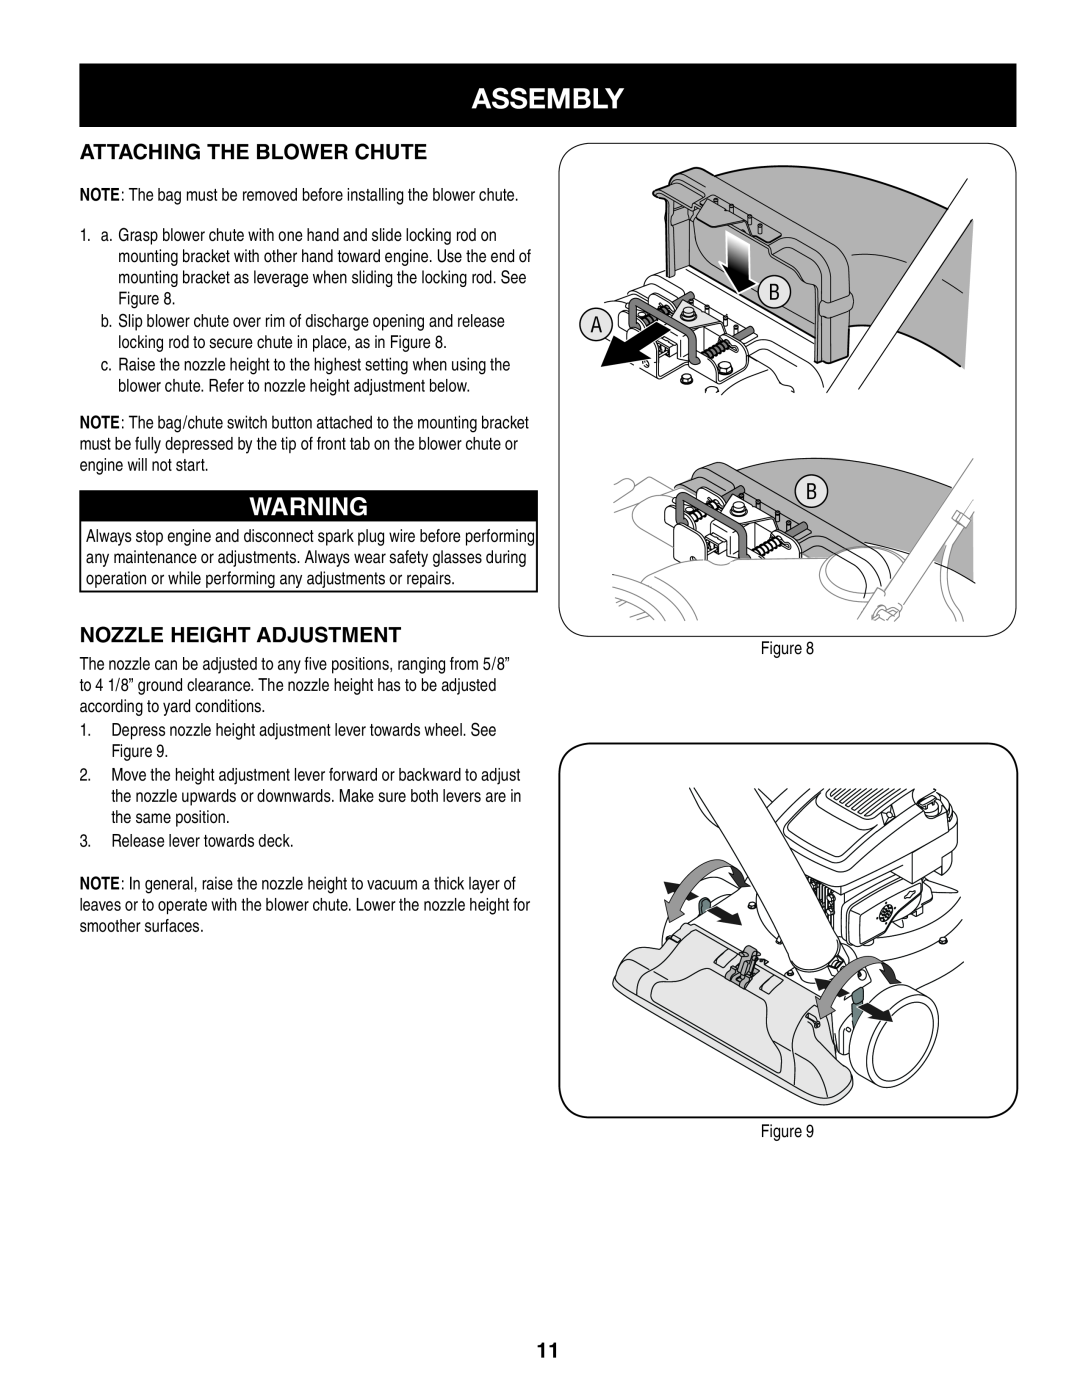 Craftsman 247.77013.0 manual Assembly, Attaching The Blower Chute, Nozzle Height Adjustment 